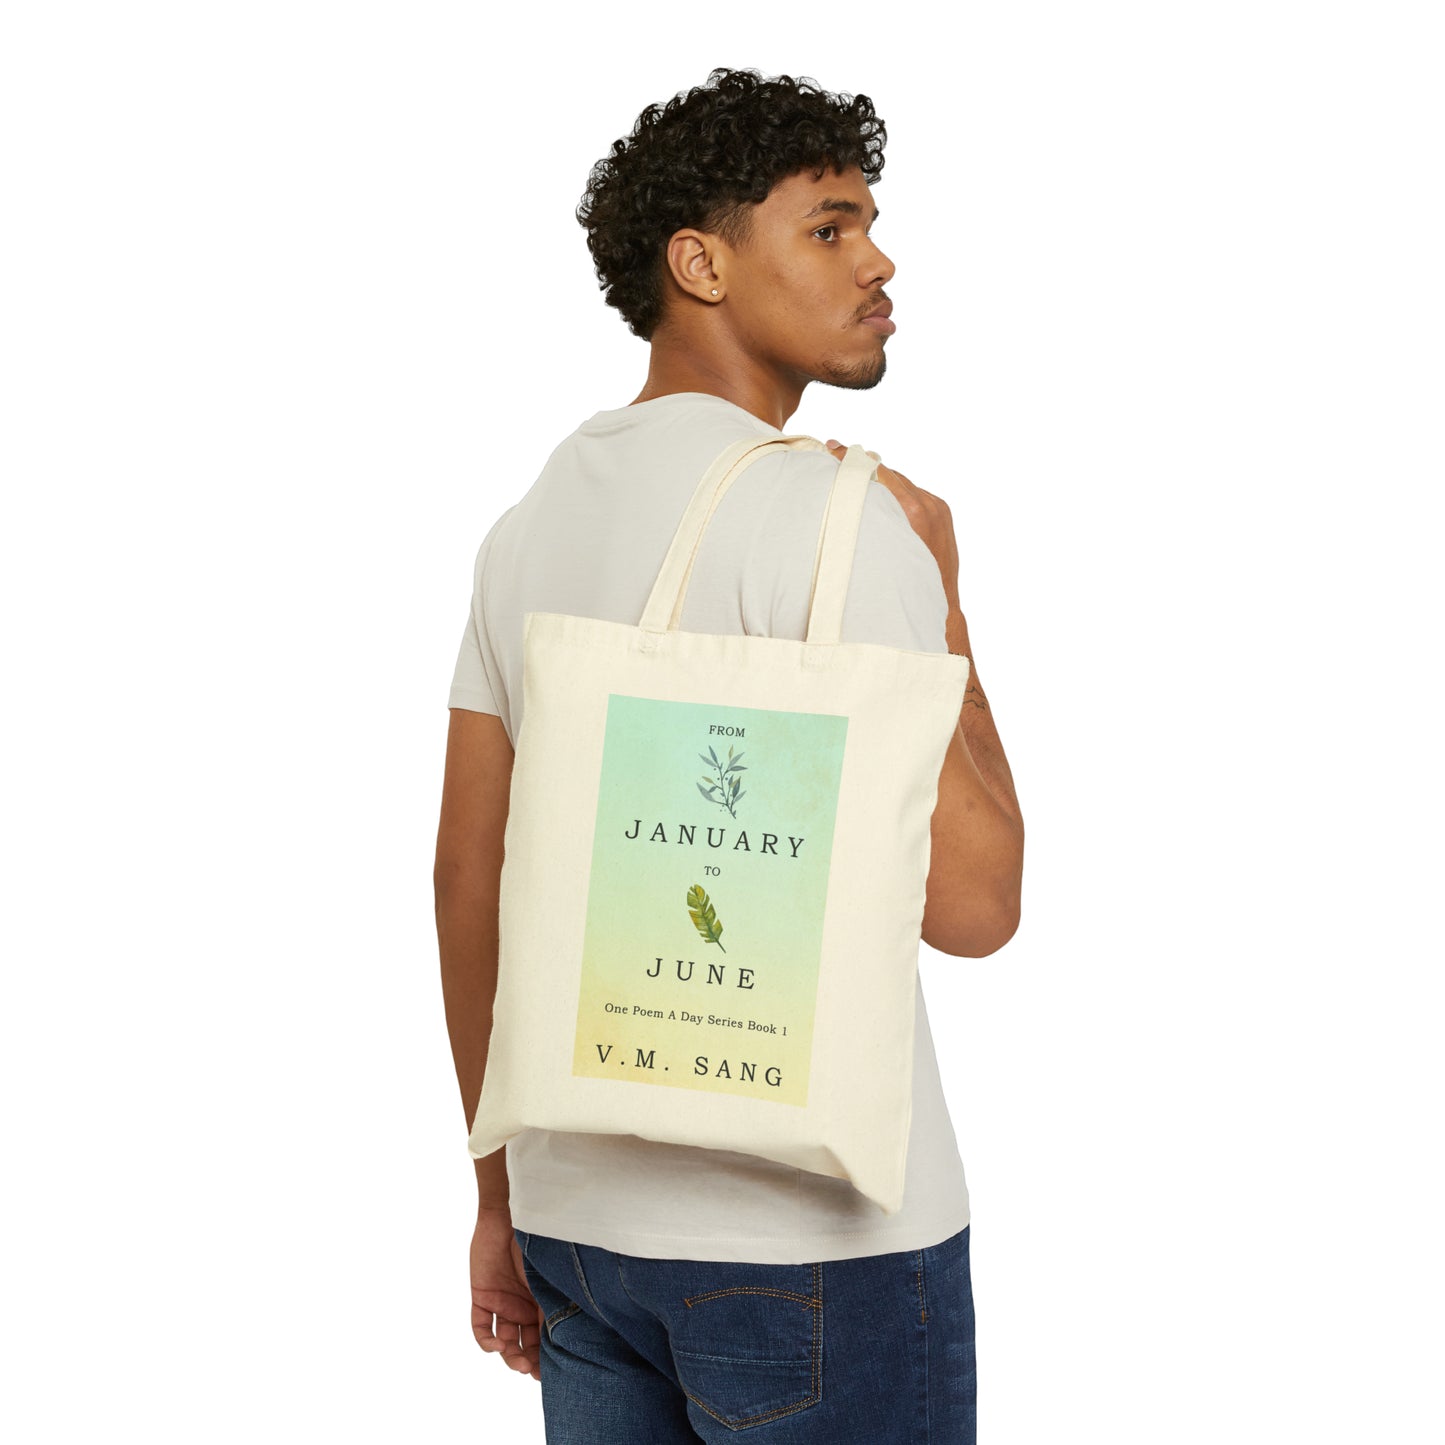 From January to June - Cotton Canvas Tote Bag